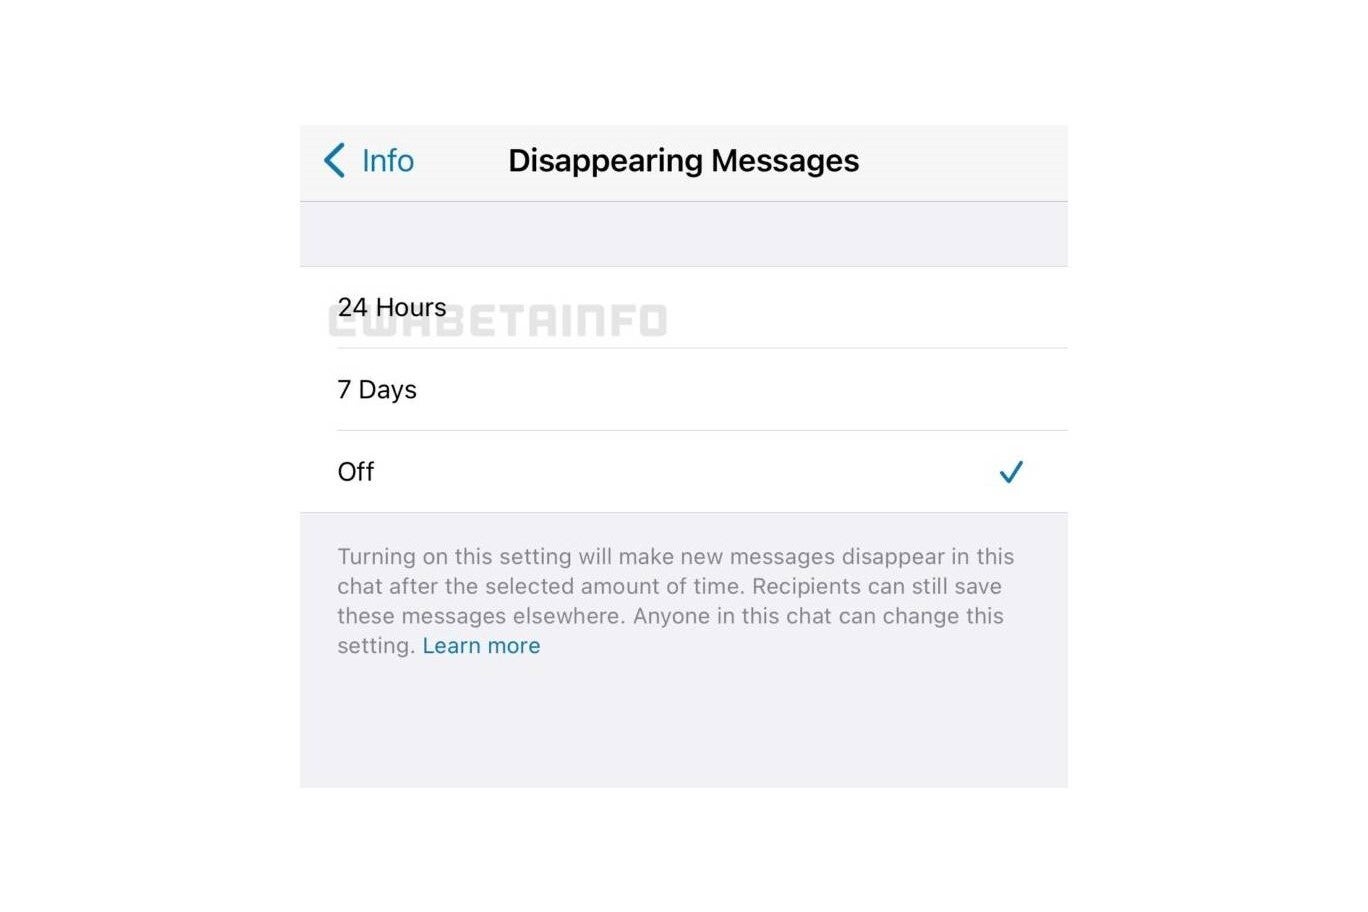 WhatsApp is currently said to be working on the new disappearing messages option - WhatsApp disappearing messages feature may offer more time options in the future